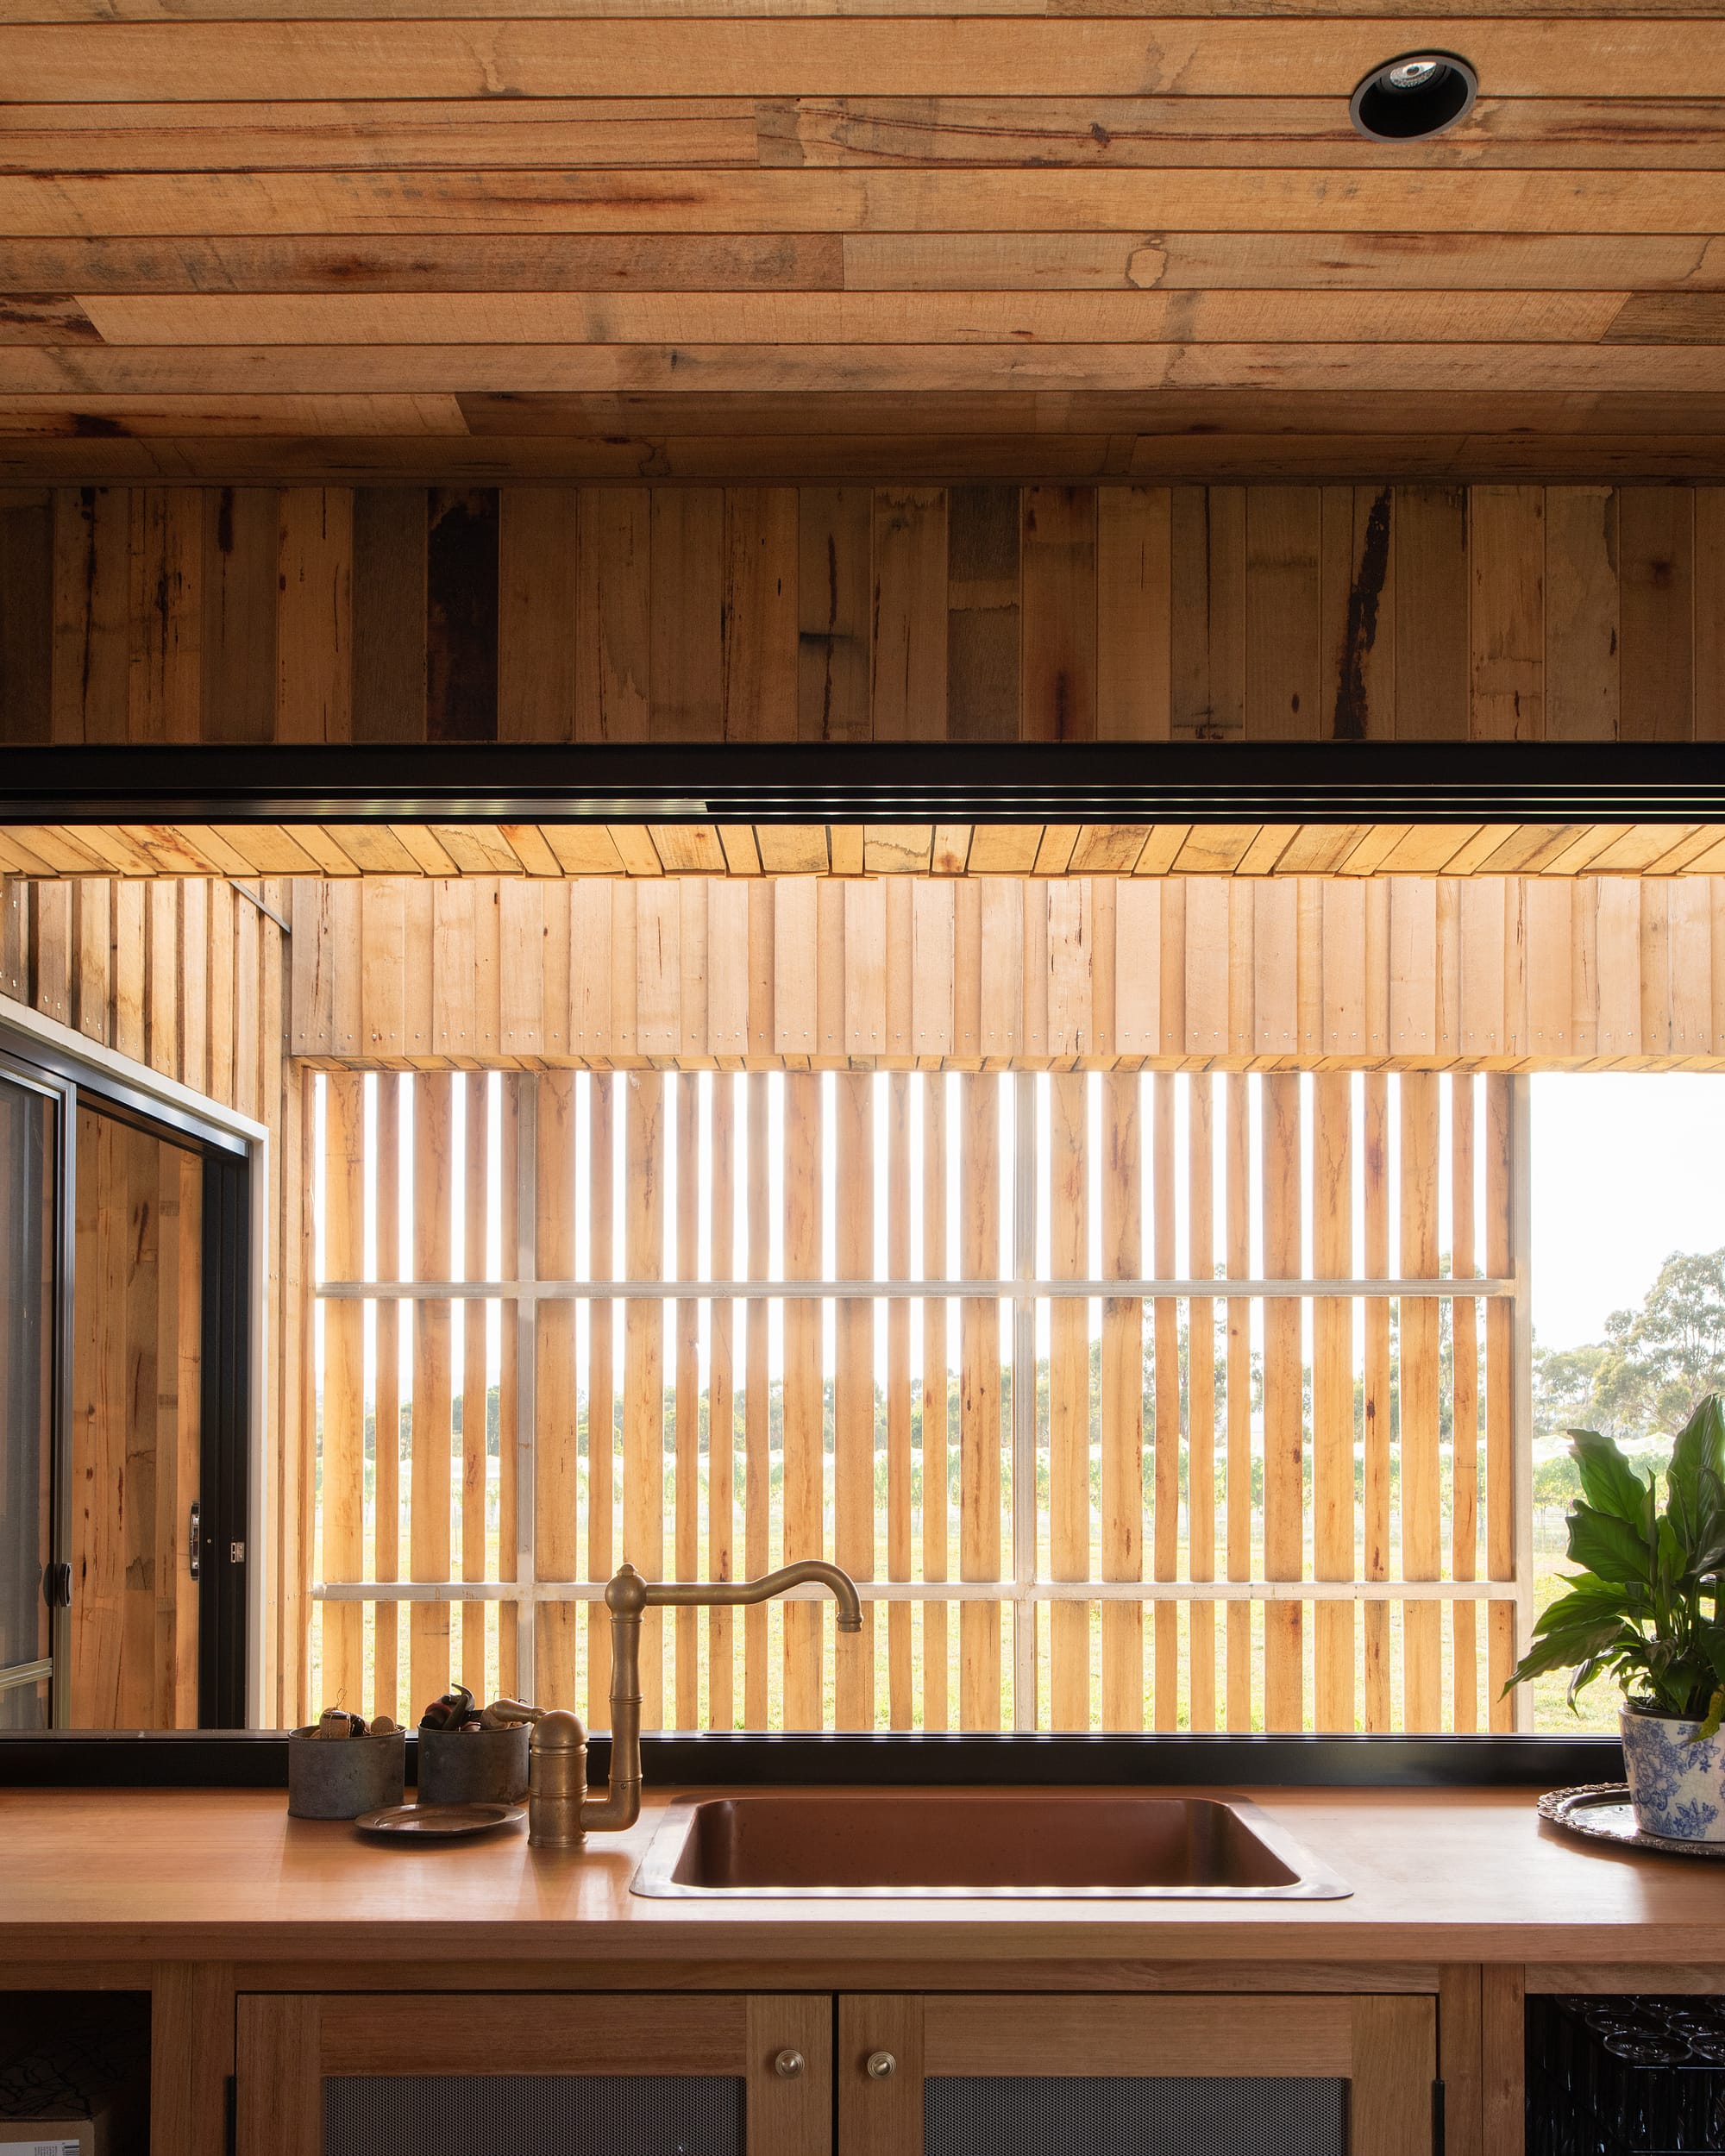 Tasmanian Timber Series: Westella Vineyard.Inside view of a kitchen at Westella Vineyard with natural light filtering through vertical timber slats, highlighting the wooden interior and a copper kitchen sink set within a wooden countertop.